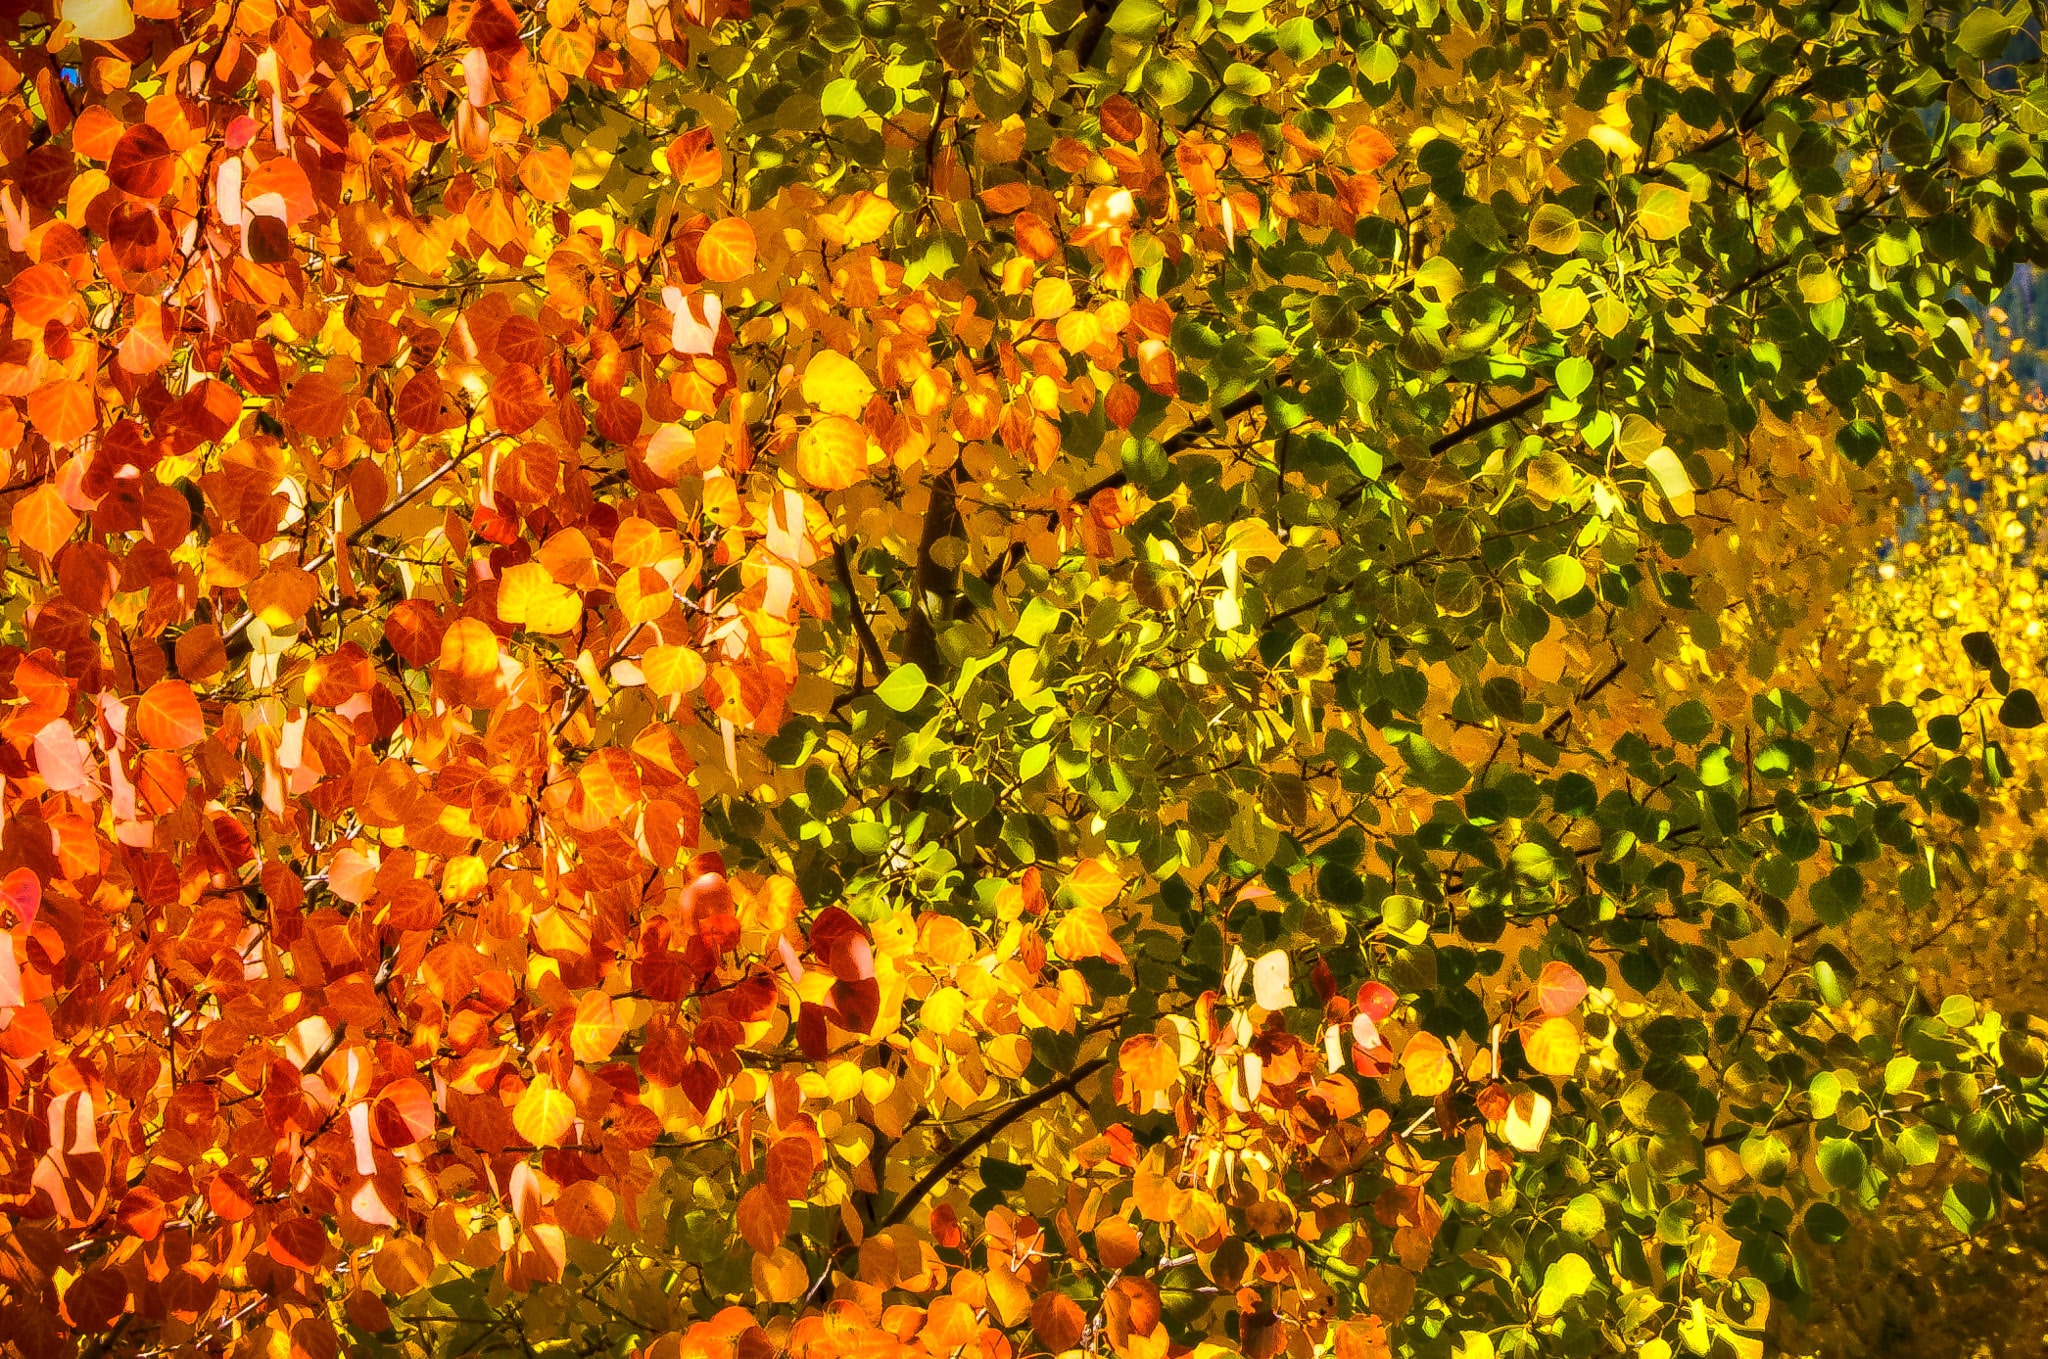 A close-up of a small grove of aspens exhibiting a spectrum of fall colors from red through orange, yellow, and green.